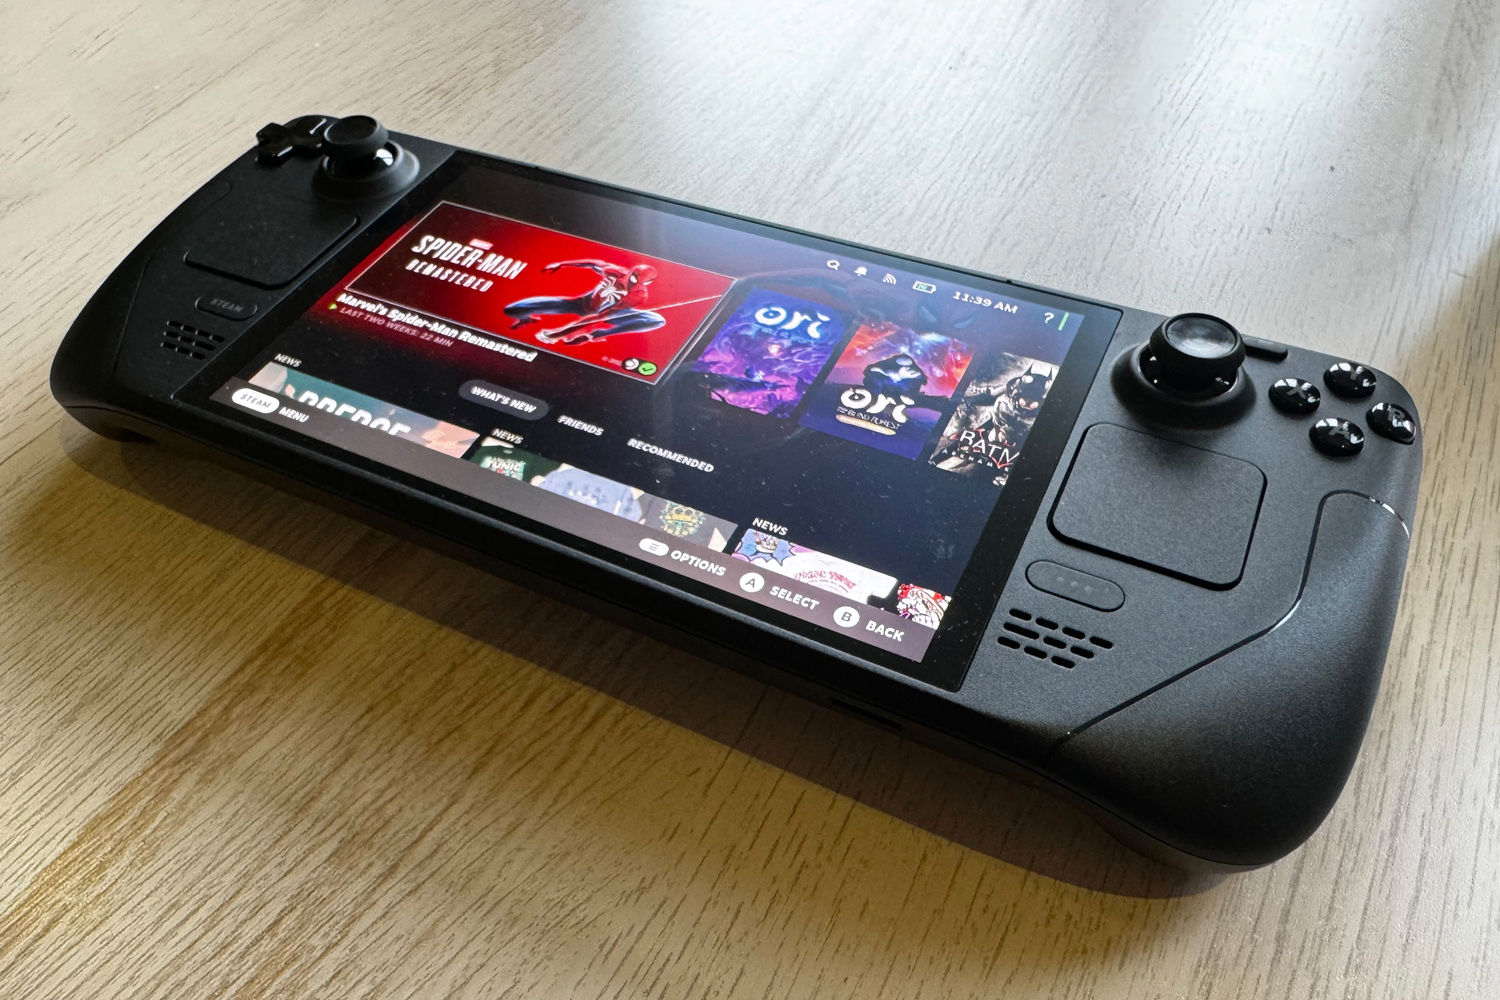 Sync Joy-Cons to PC   - The Independent Video Game Community